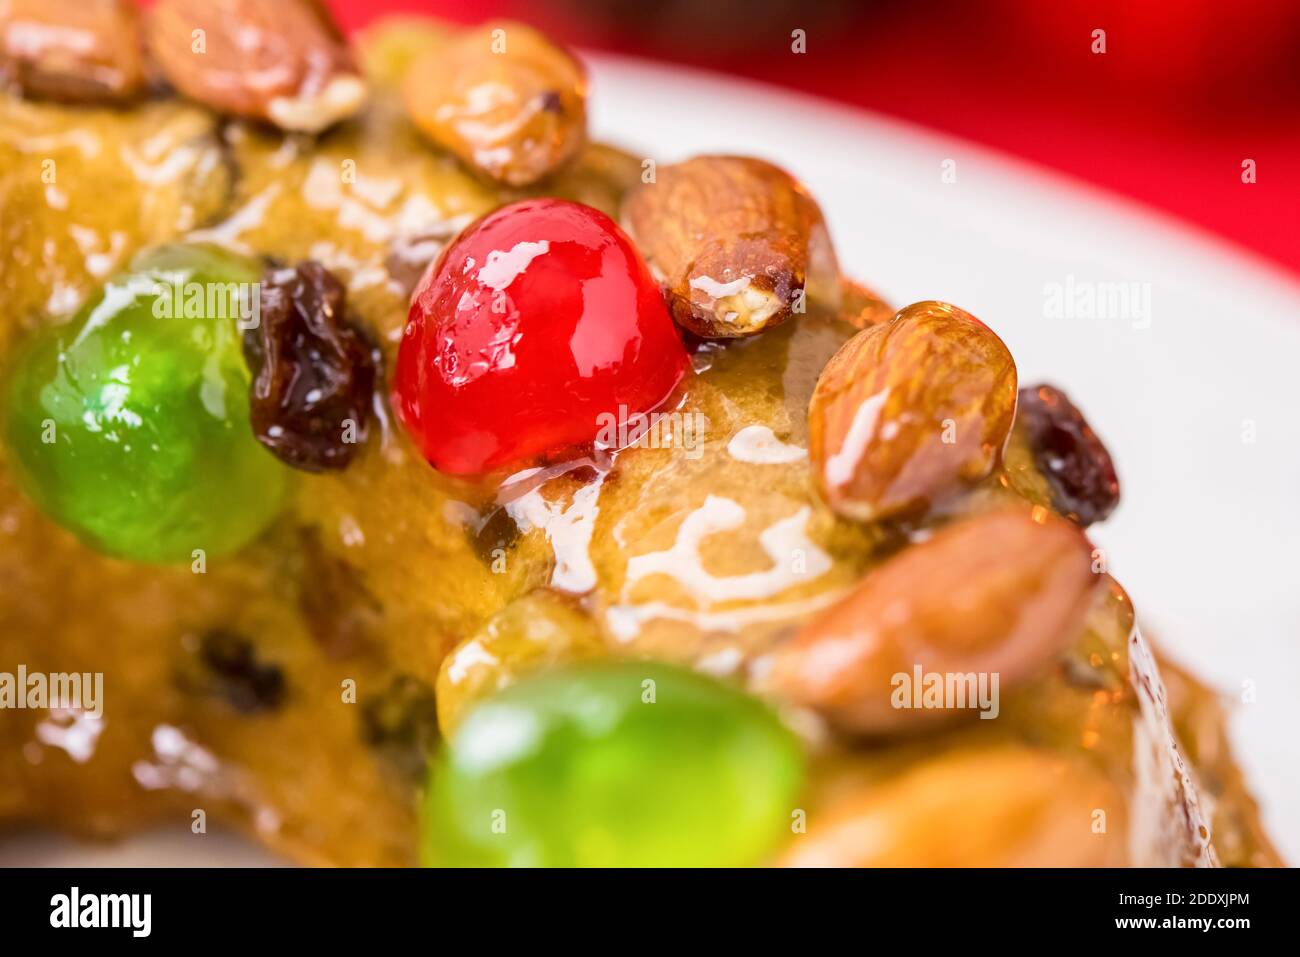 Close up of glazed colorful Christmas fruitcake topped with almonds and glace cherries Stock Photo